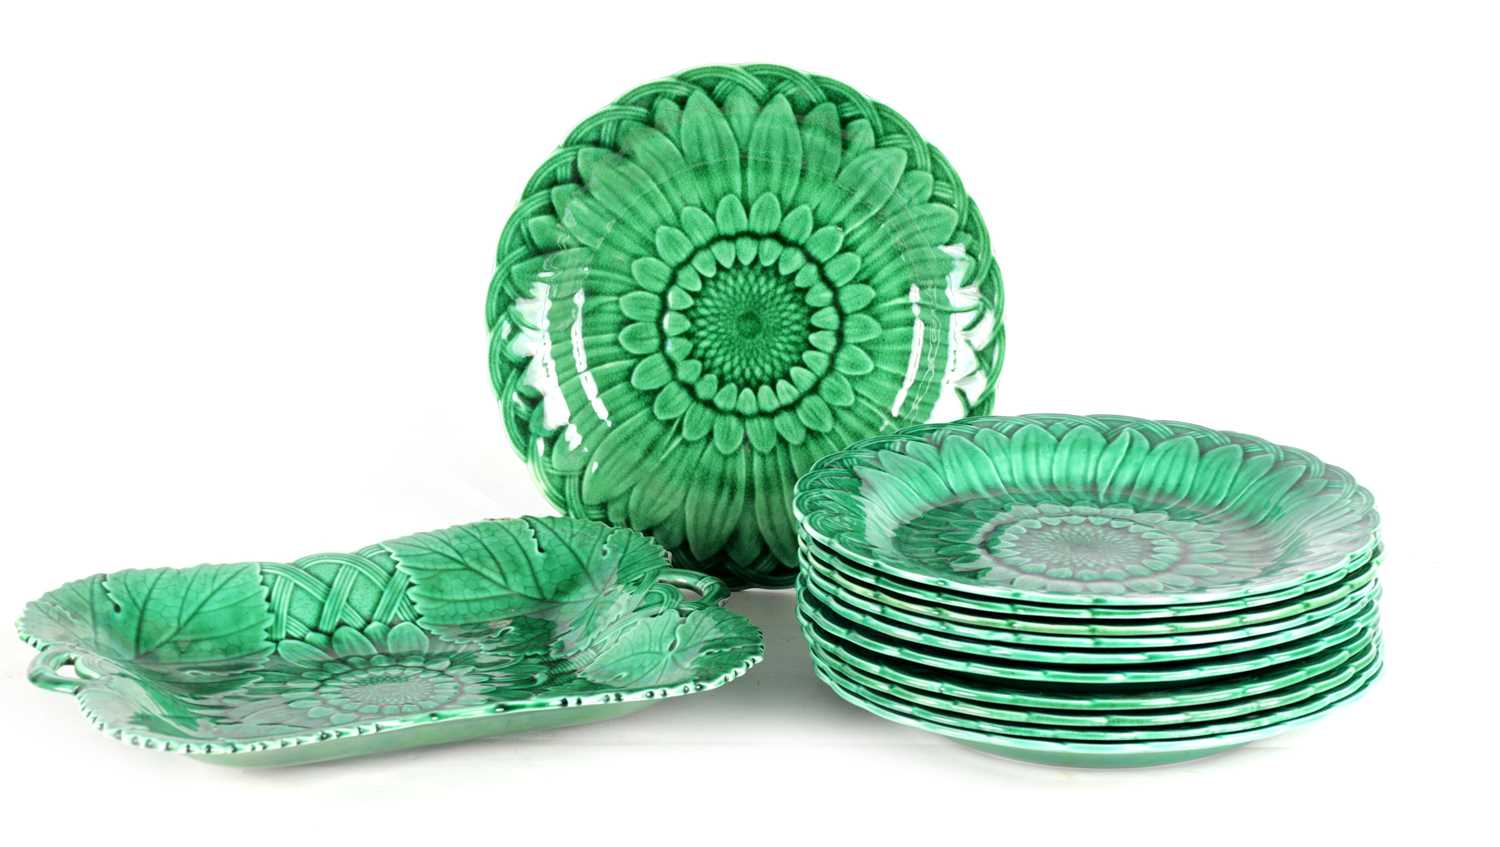 Lot 26 - A COLLECTION OF ELEVEN 19TH CENTURY WEDGWOOD GREEN MAJOLICA PLATES